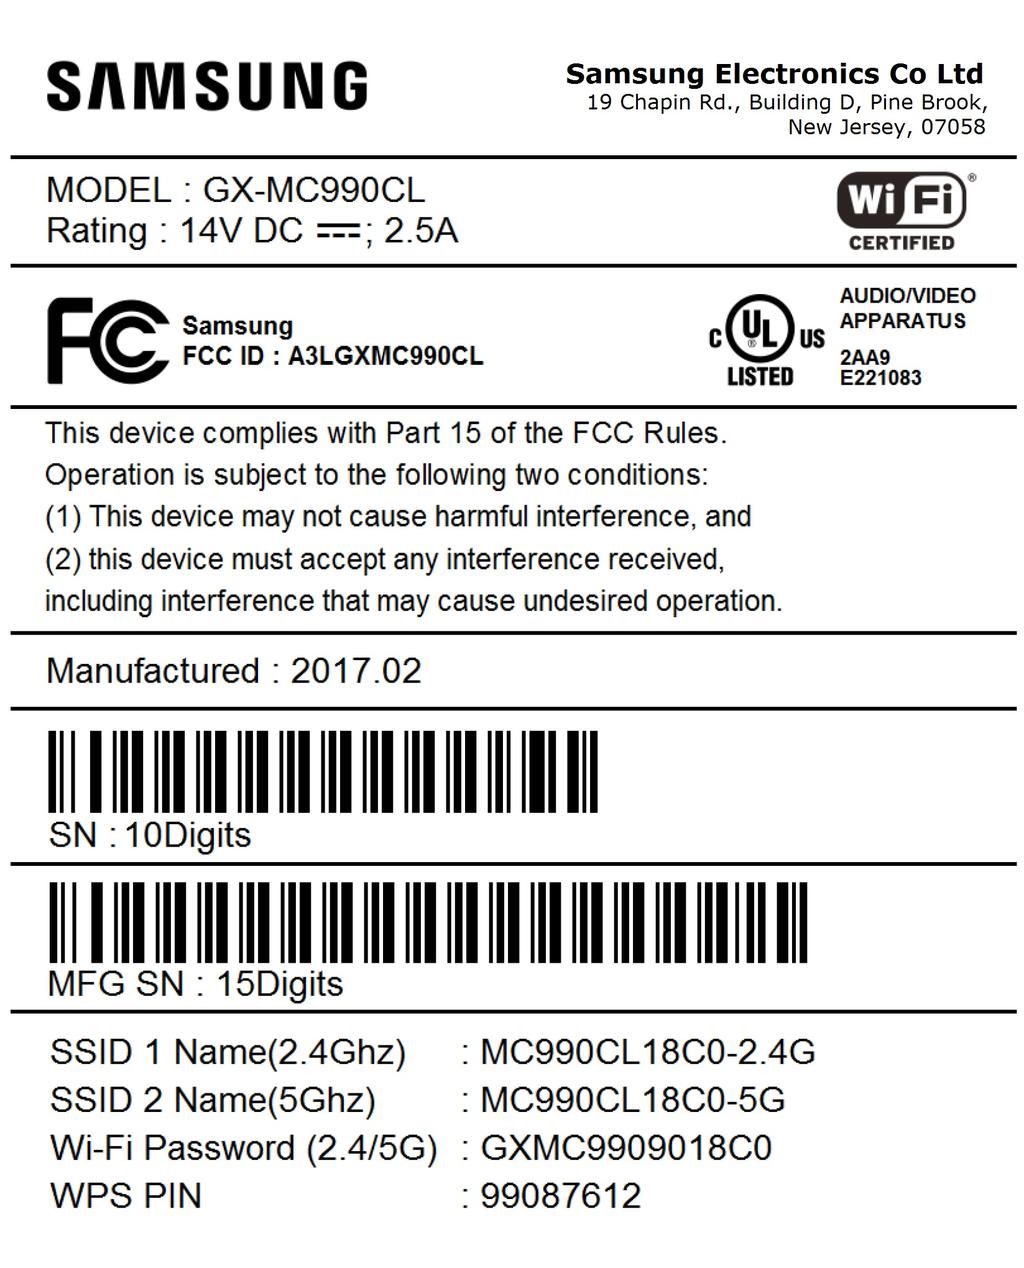 SSID 1 NAME(2.4Ghz) is the network name of the 2.4 GHz access point and is of the following format: MC990CLXXXX-2.4G (where X is an alphanumeric character).